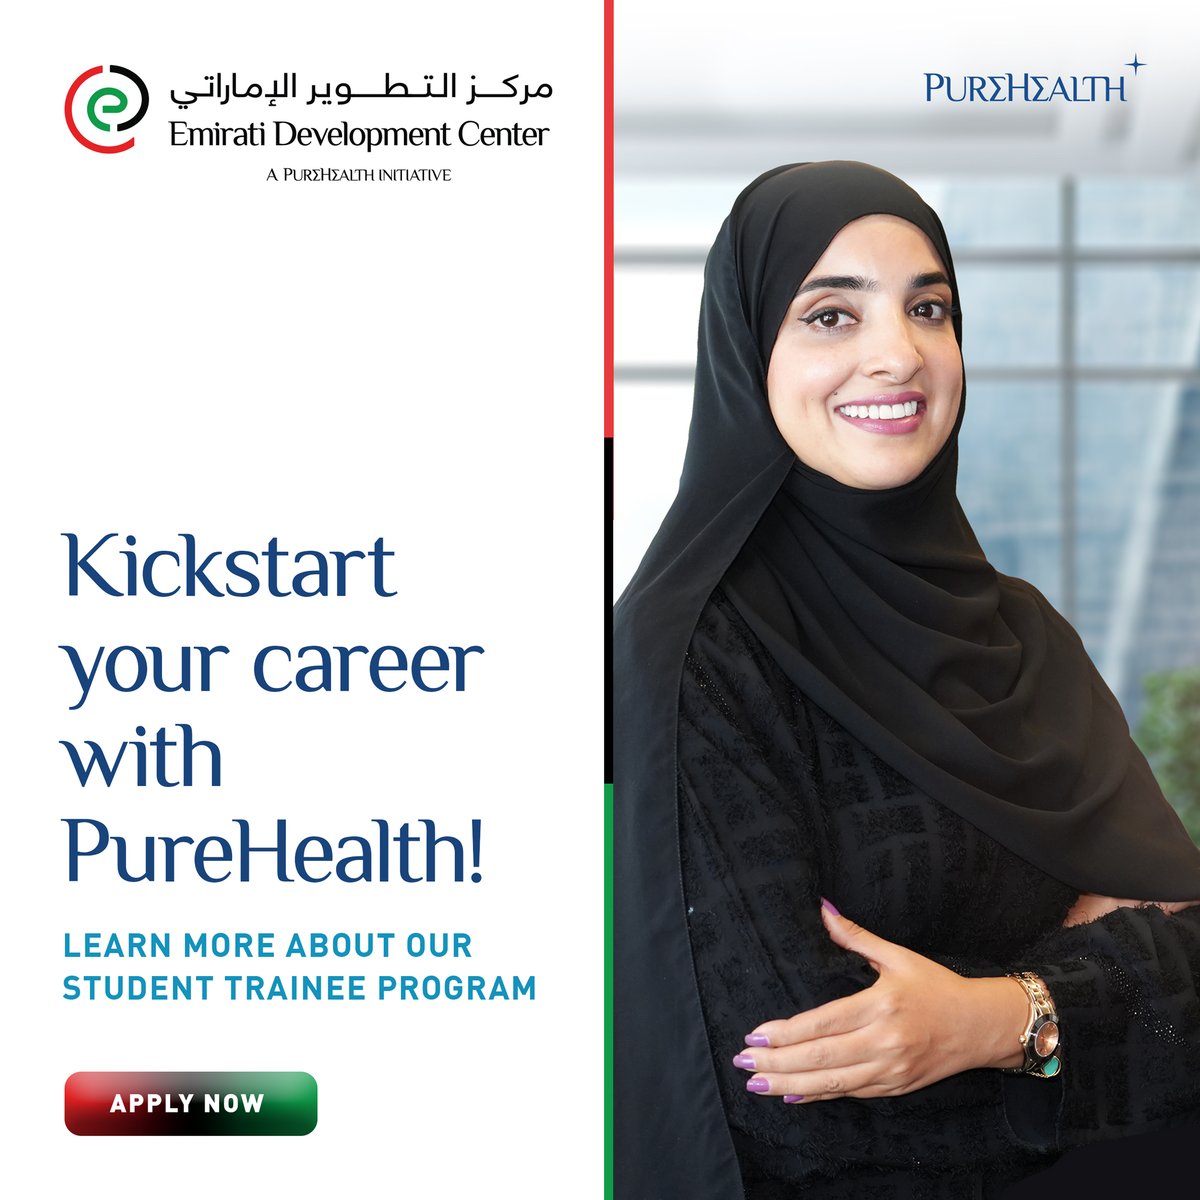 Looking to kickstart your career? Join PureHealth's Emirati Development Center programs and be part of the largest healthcare network in the Middle East. Apply Now: purehealth.ae/emiratidevelop…